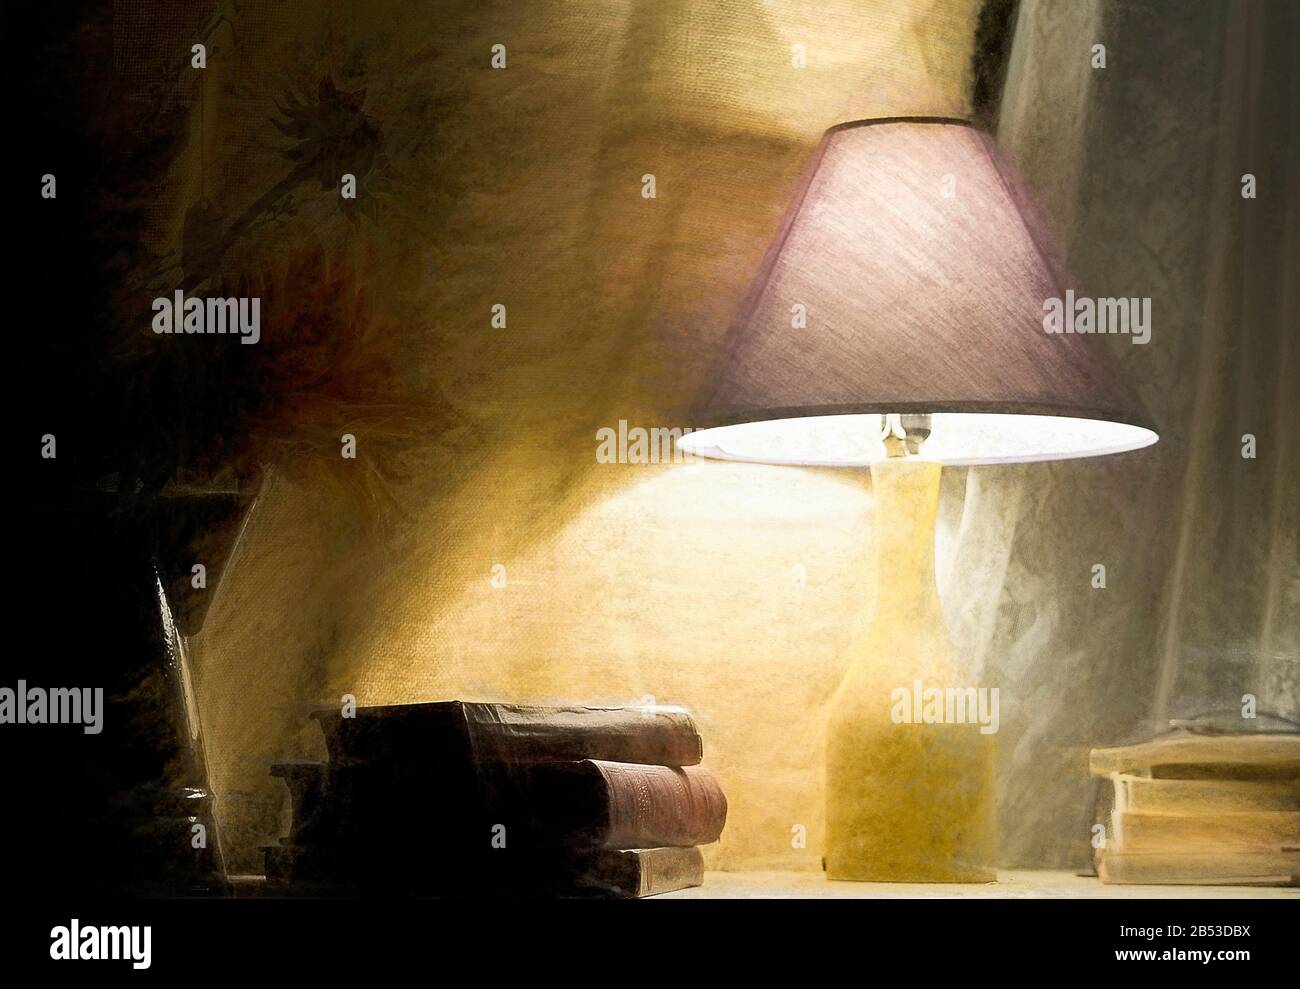 impressionism still life of glowing table lamp and stack of old books Stock Photo